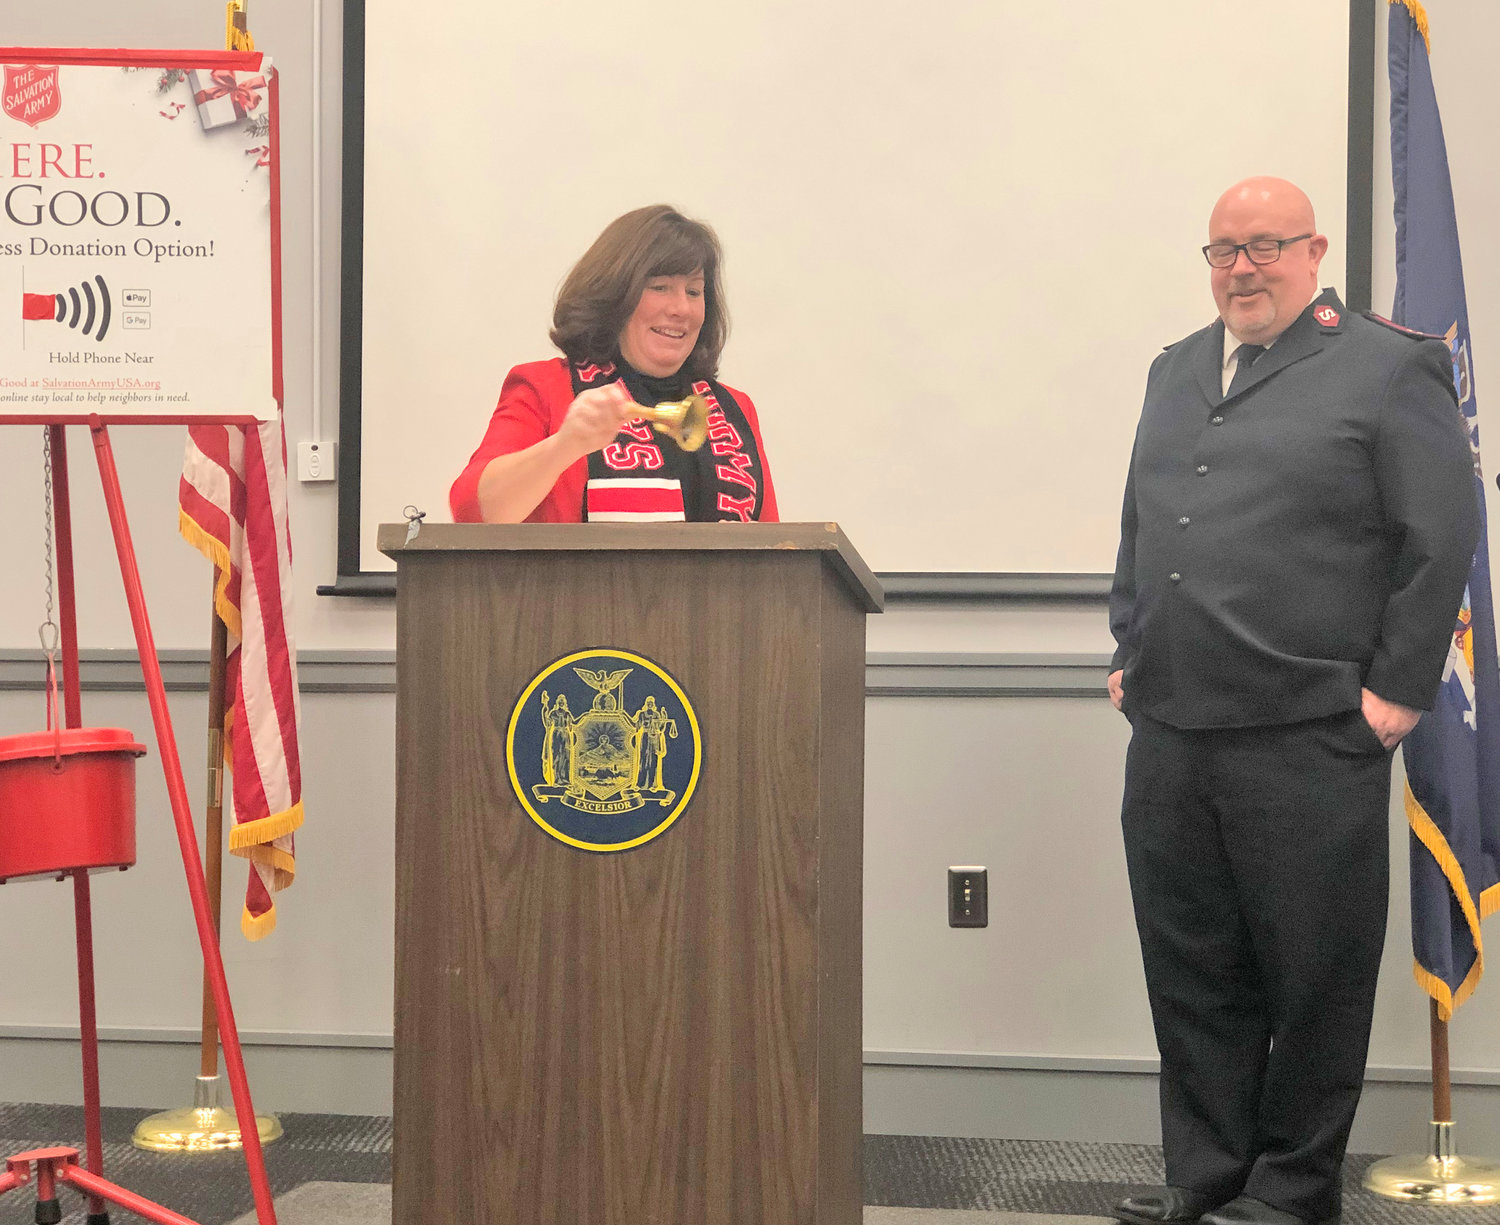 Assemblywoman Marianne Buttenschon, D-119, Marcy, will serve as honorary chair for the 2021 Utica Salvation Army Red Kettle Campaign.